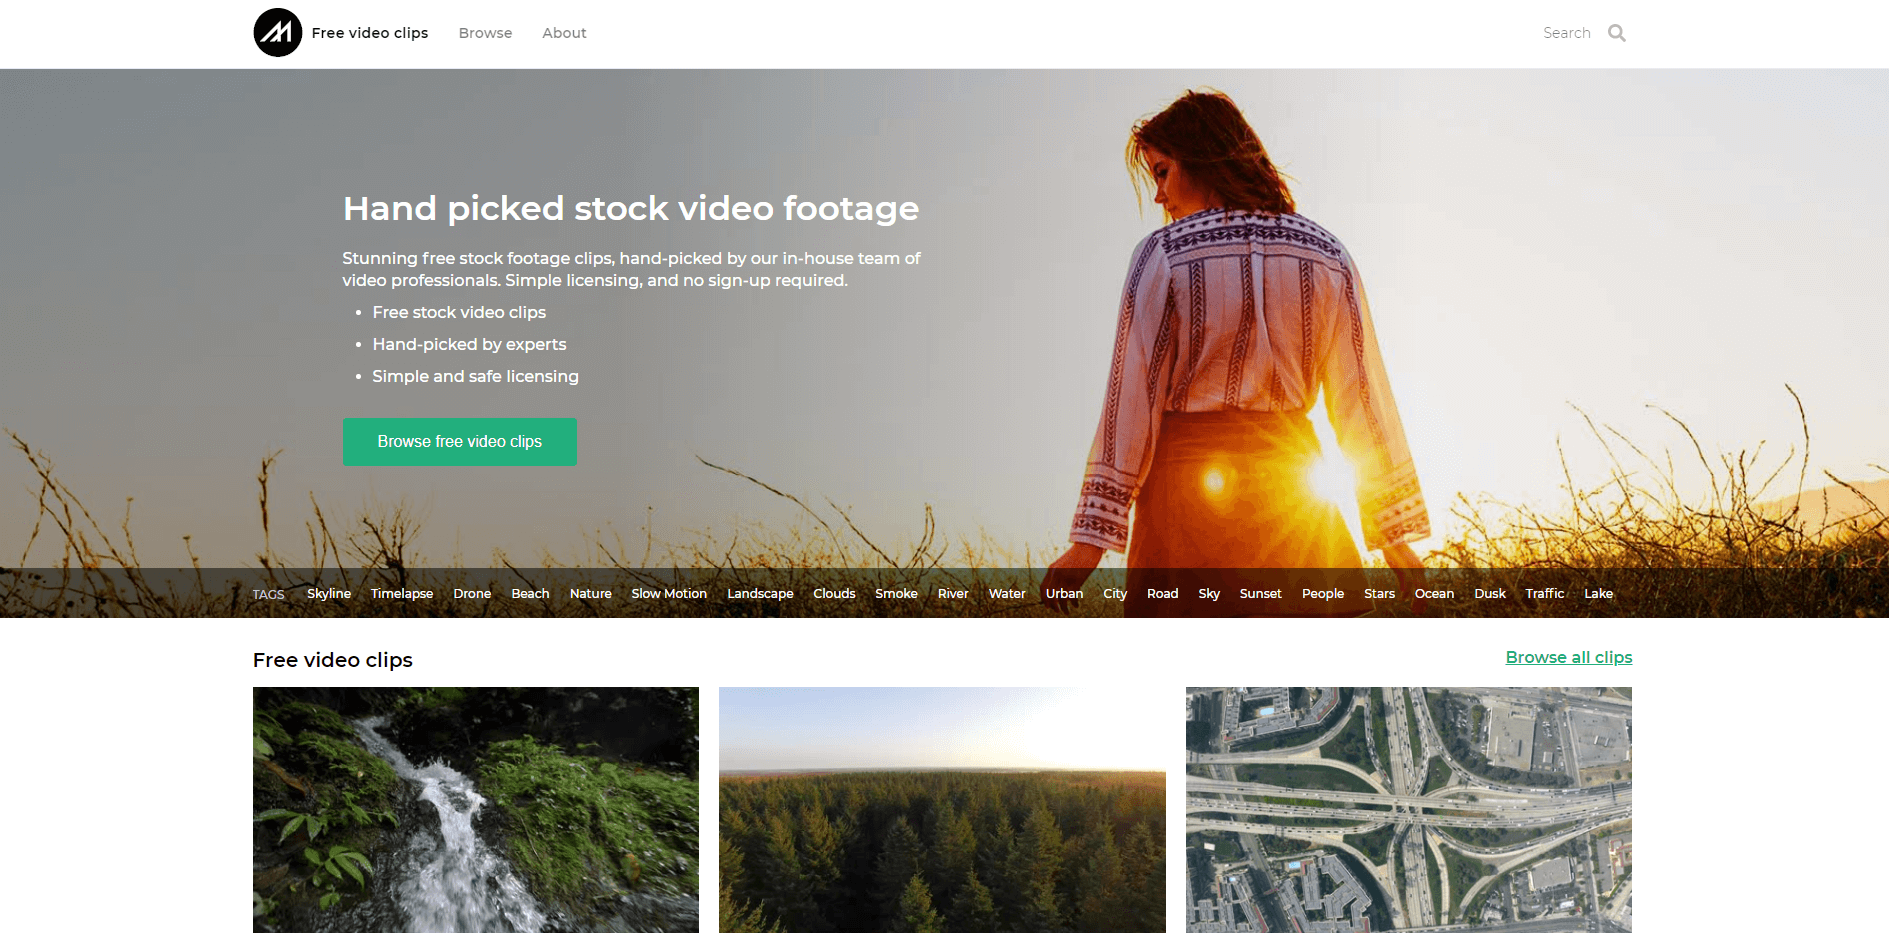 royalty-free stock footage